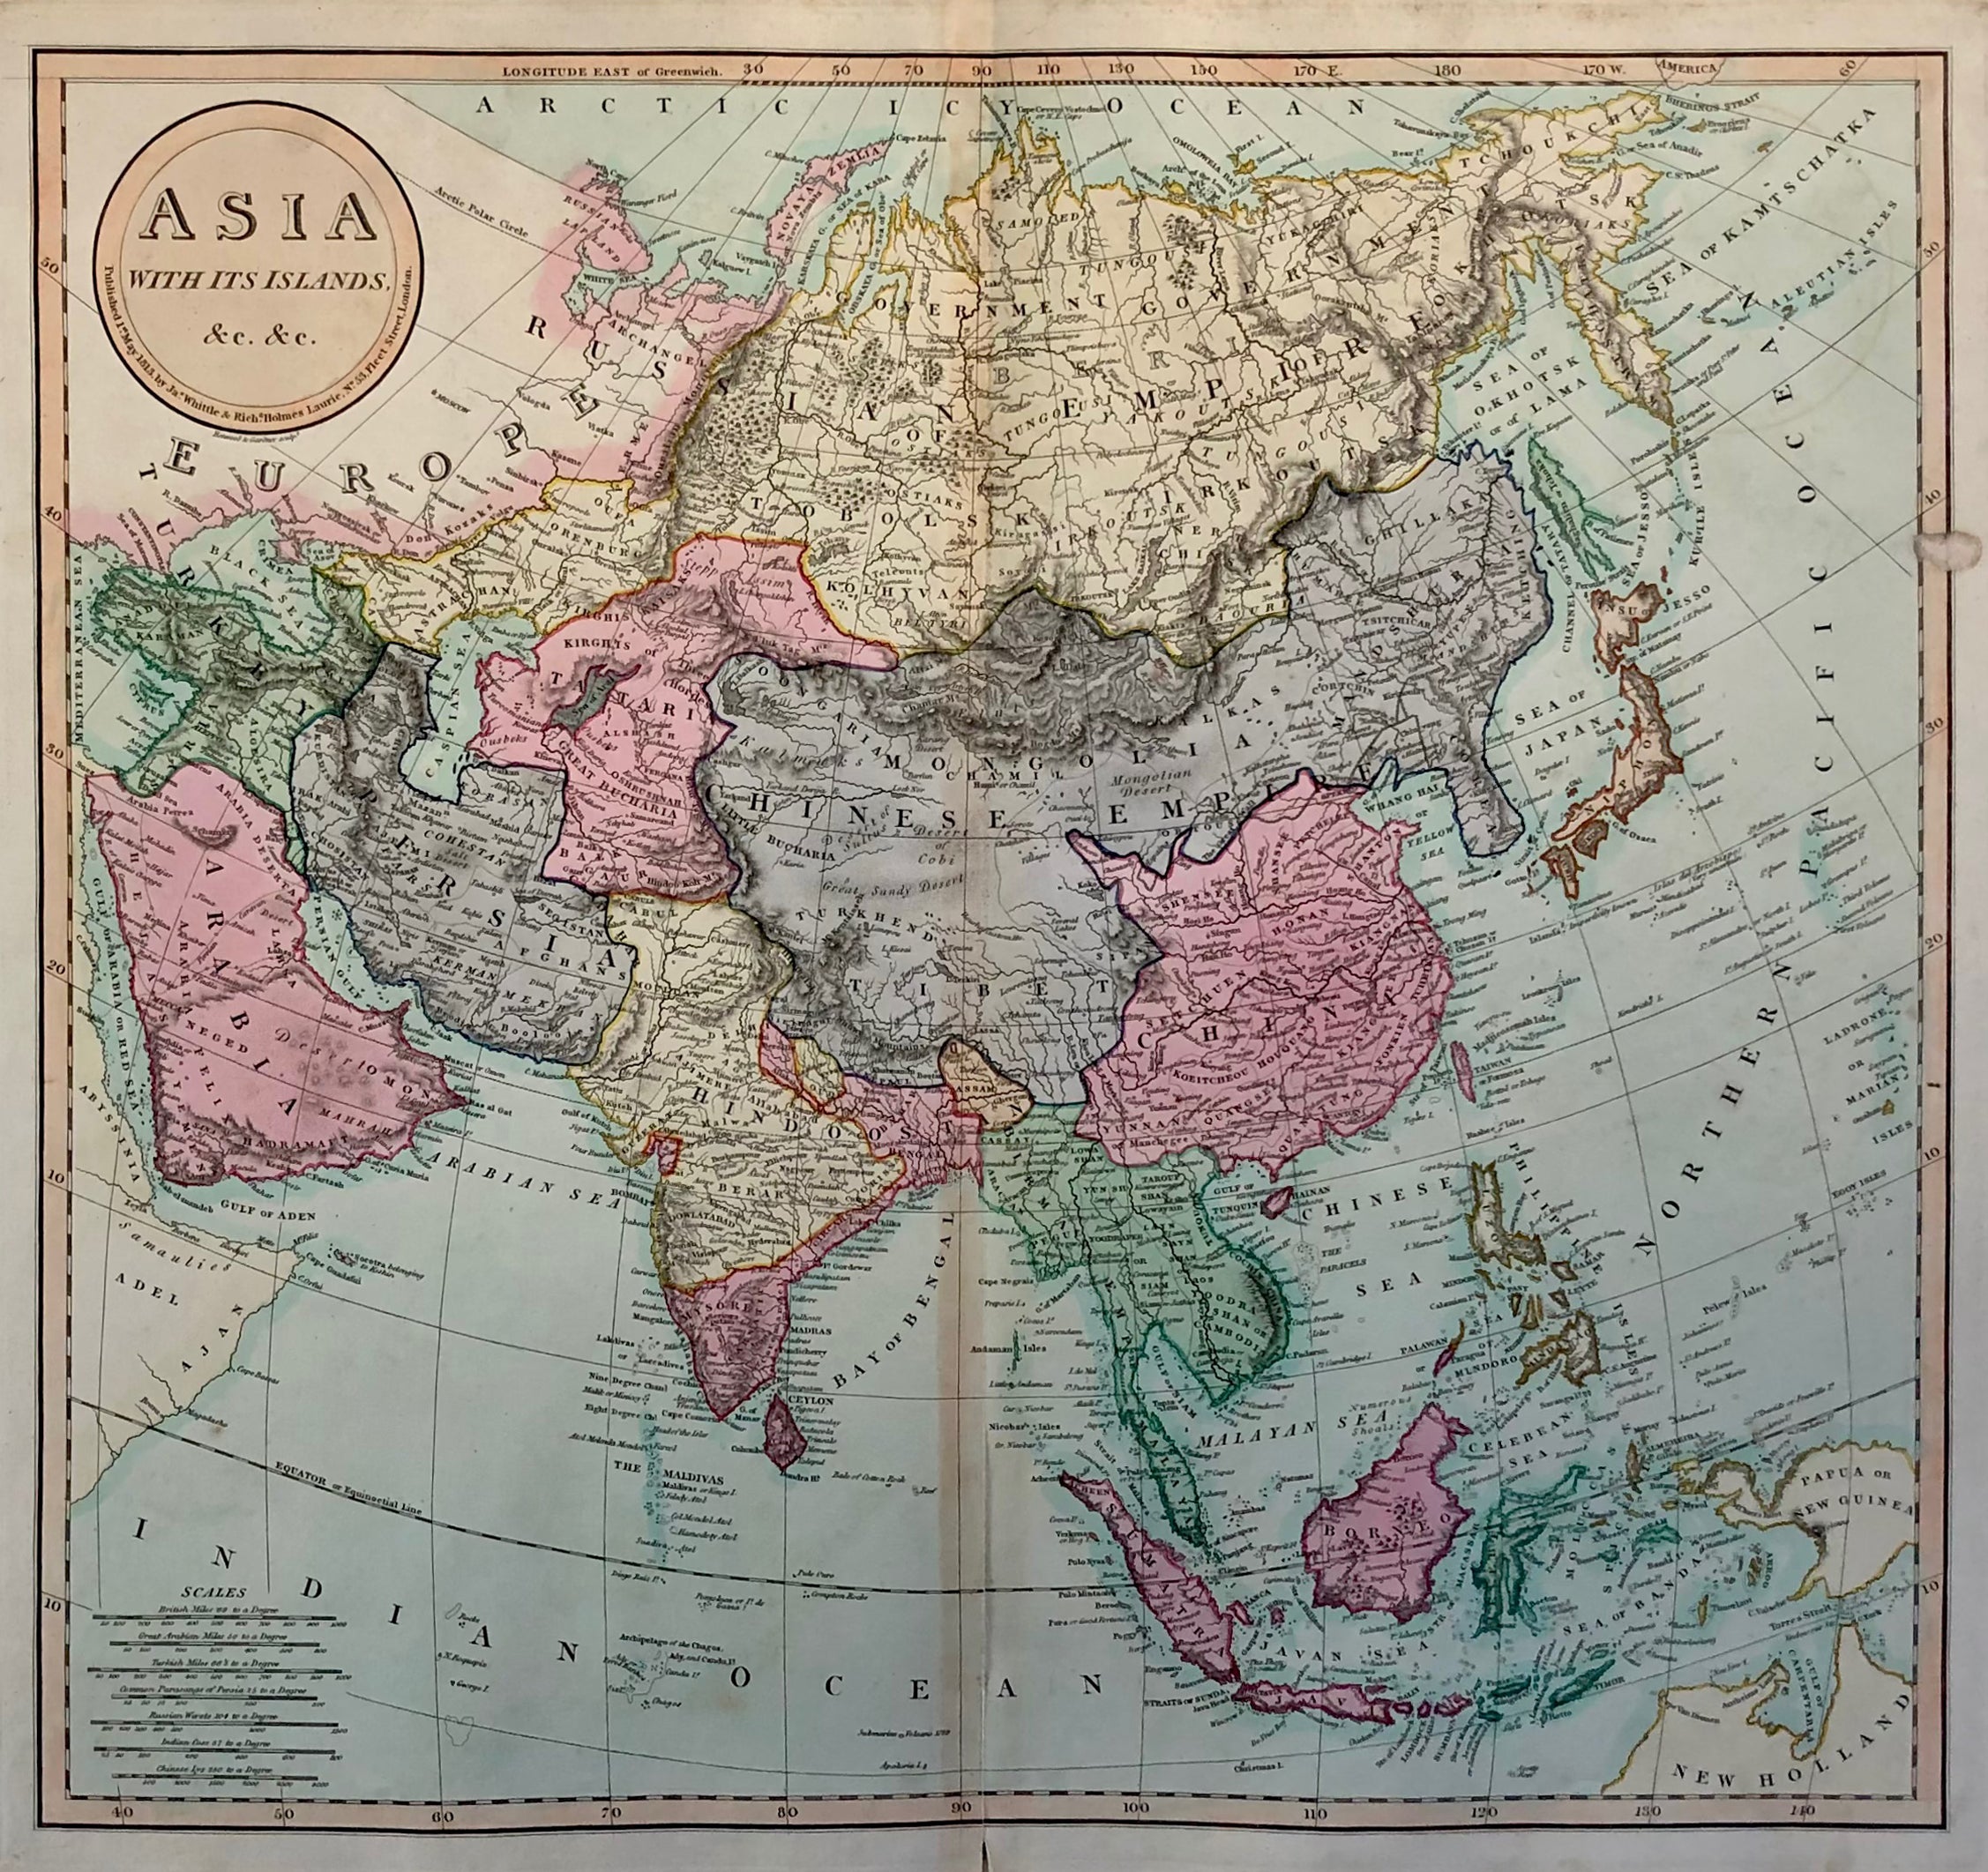 Asia with its islands